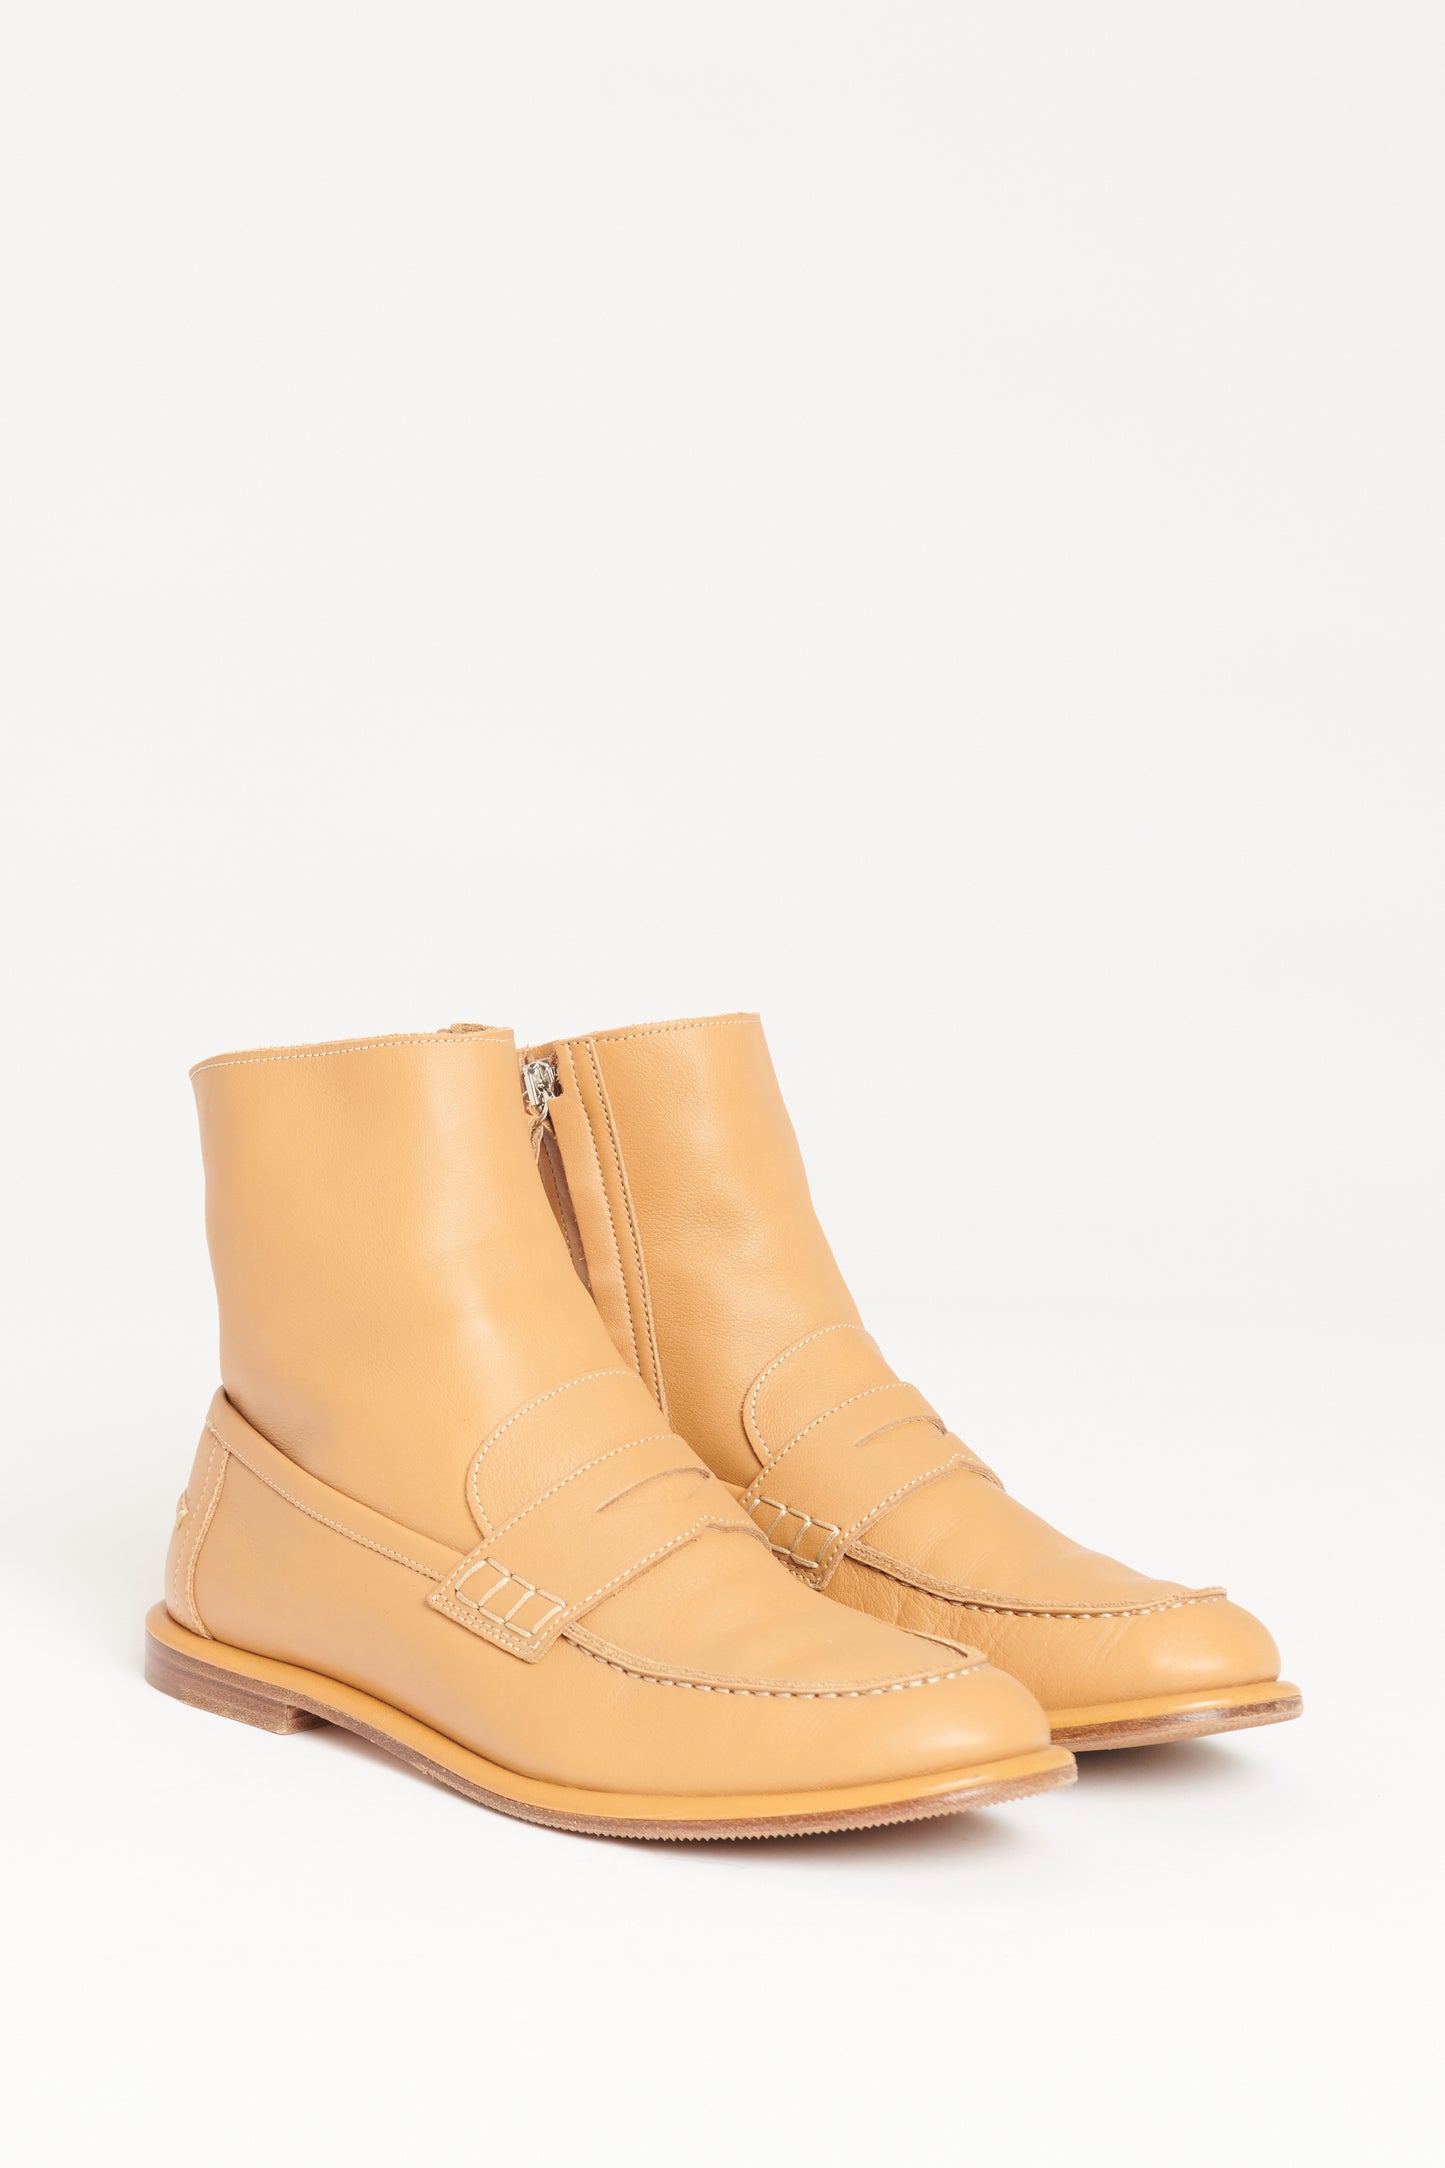 Tan Leather Preowned Zip Up Loafer Boots